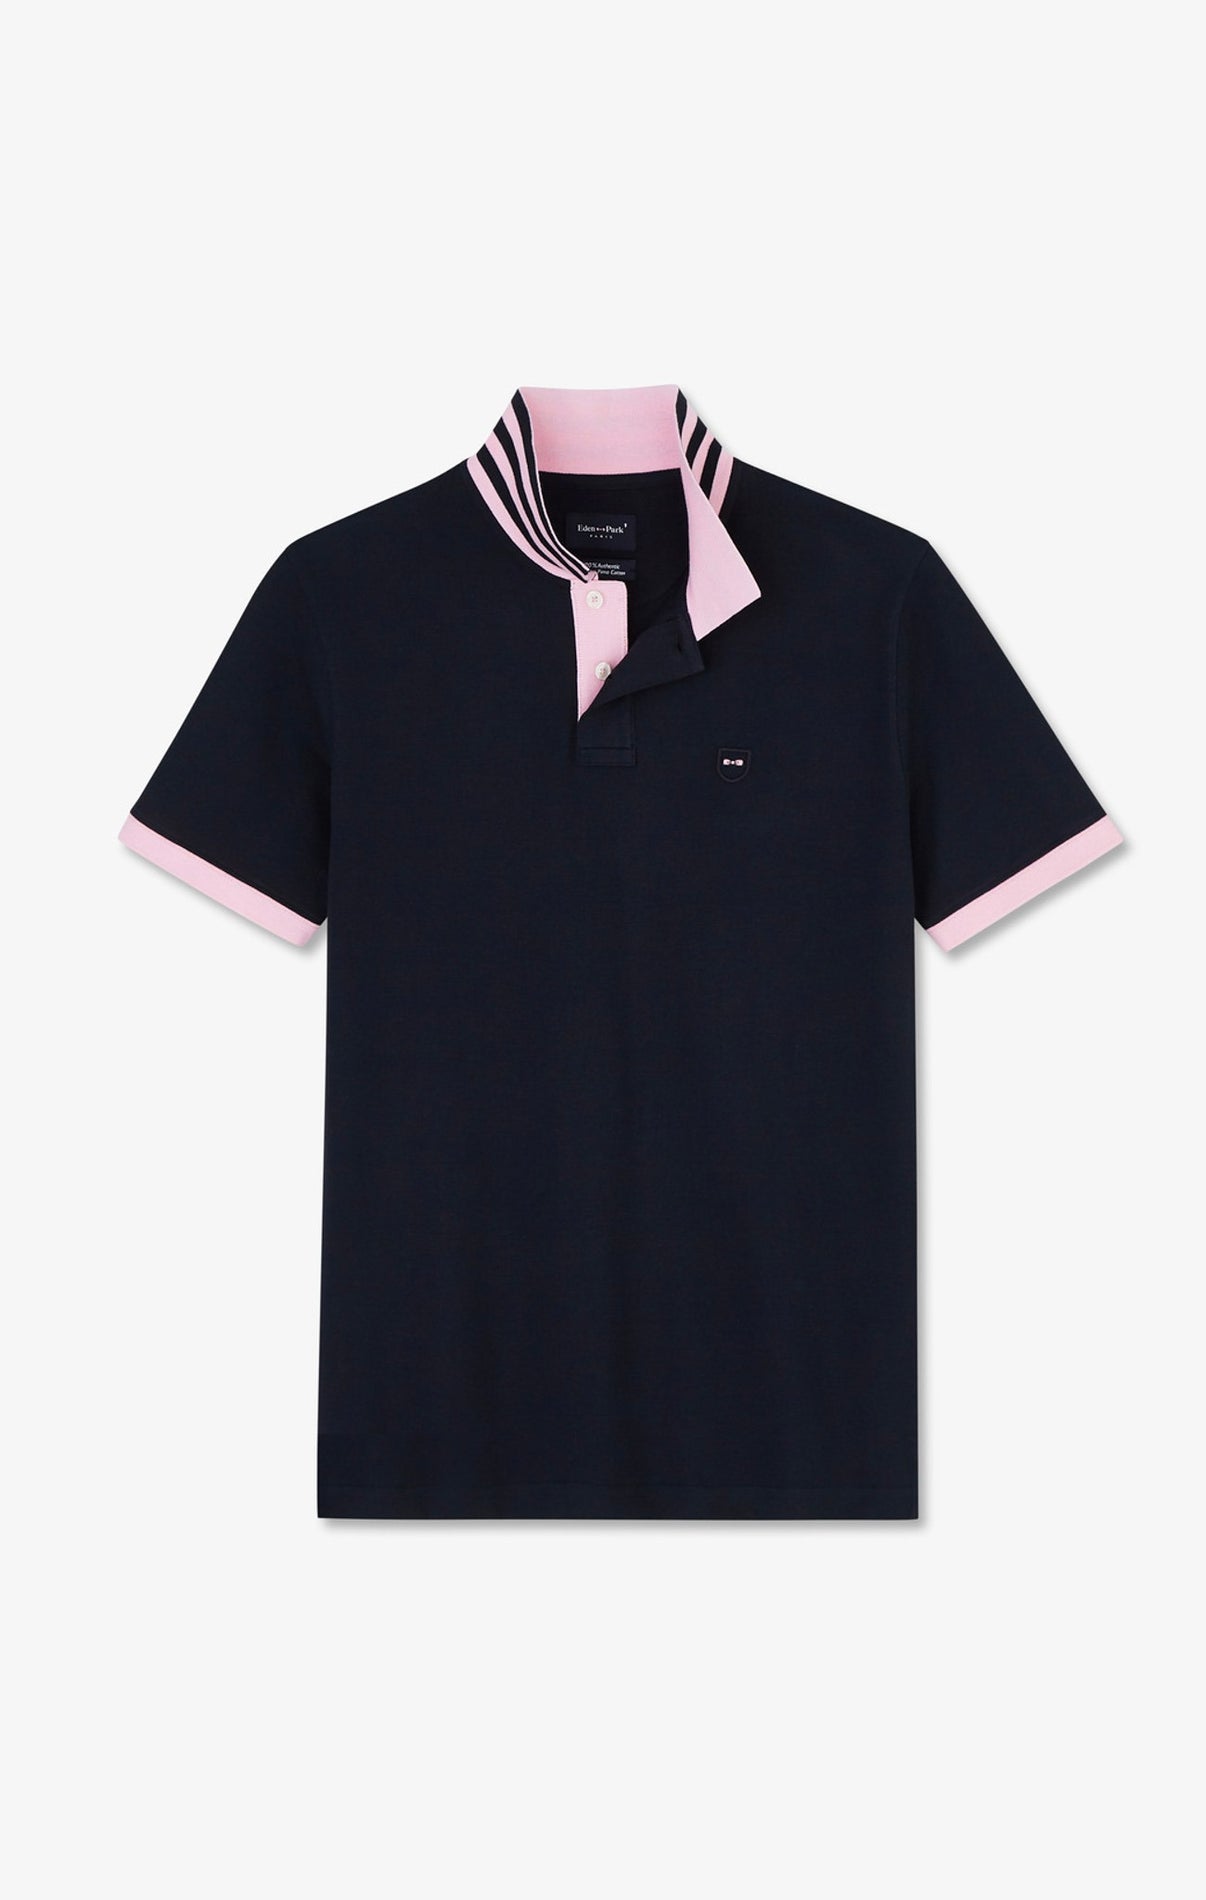 Eden Park Navy and Pink Contrast Polo Shirt